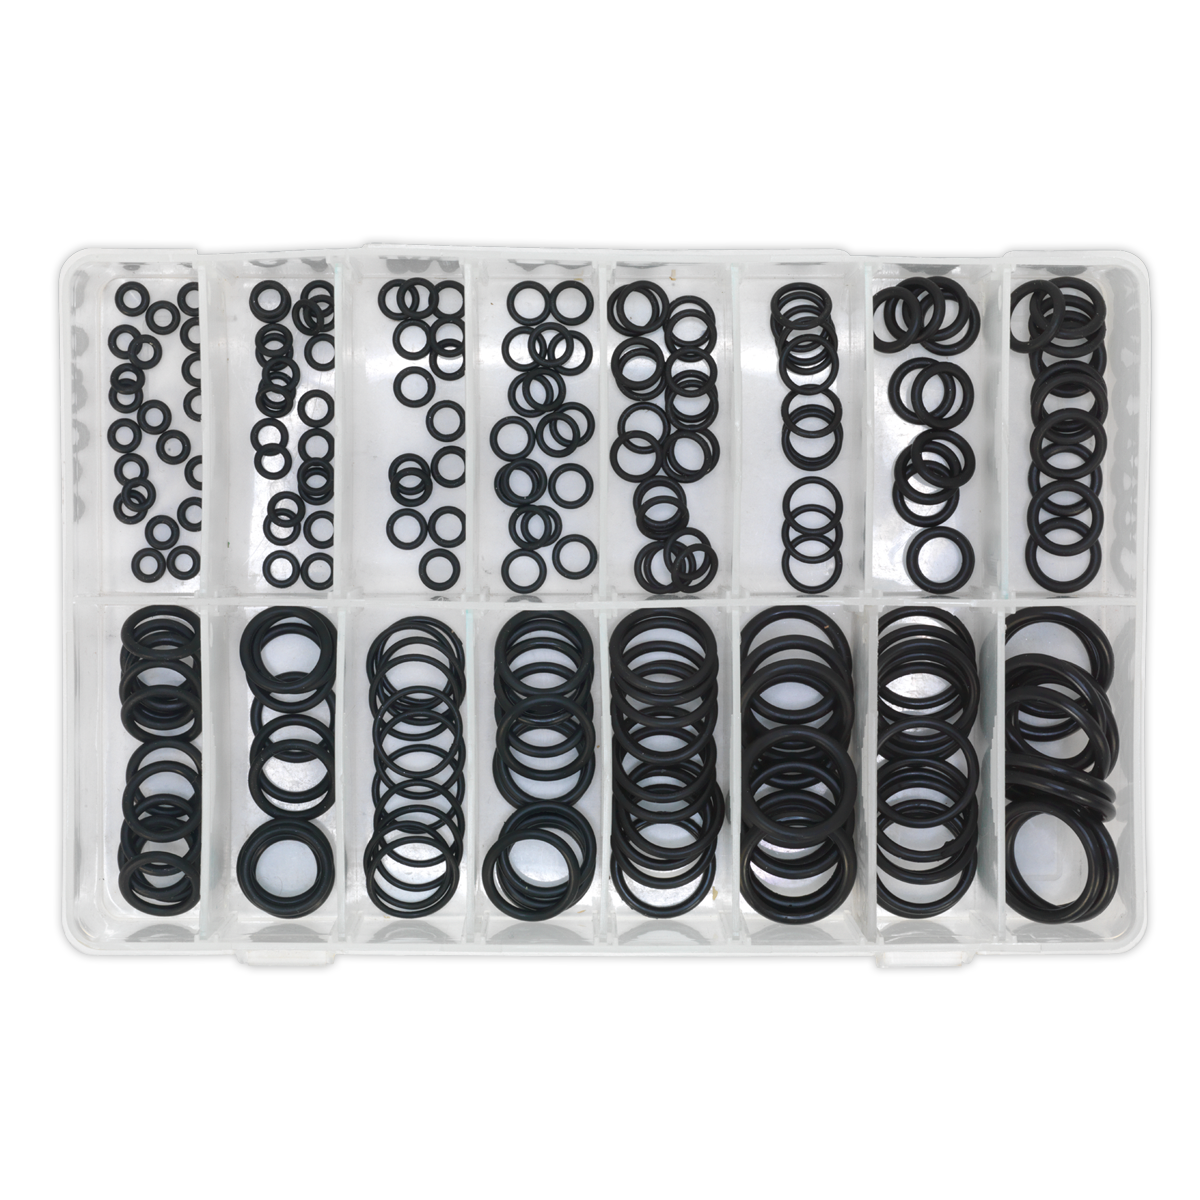 Sealey 225pc Rubber O-Ring Assortment - Metric AB004OR